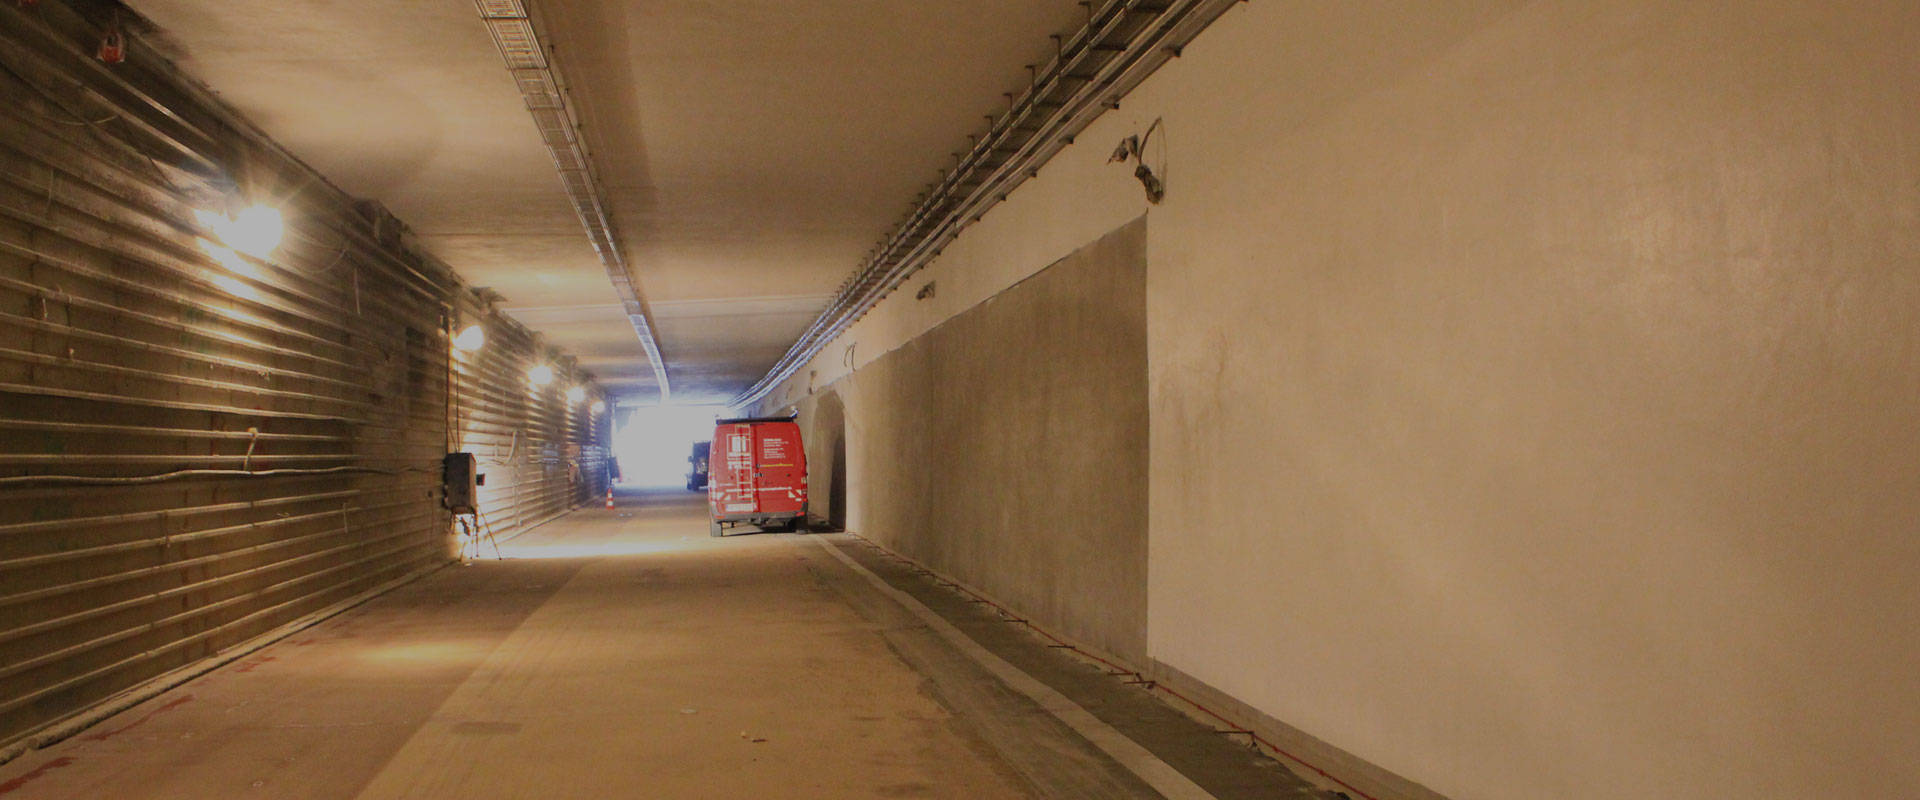 Structural fire protection in a motorway tunnel in Cologne